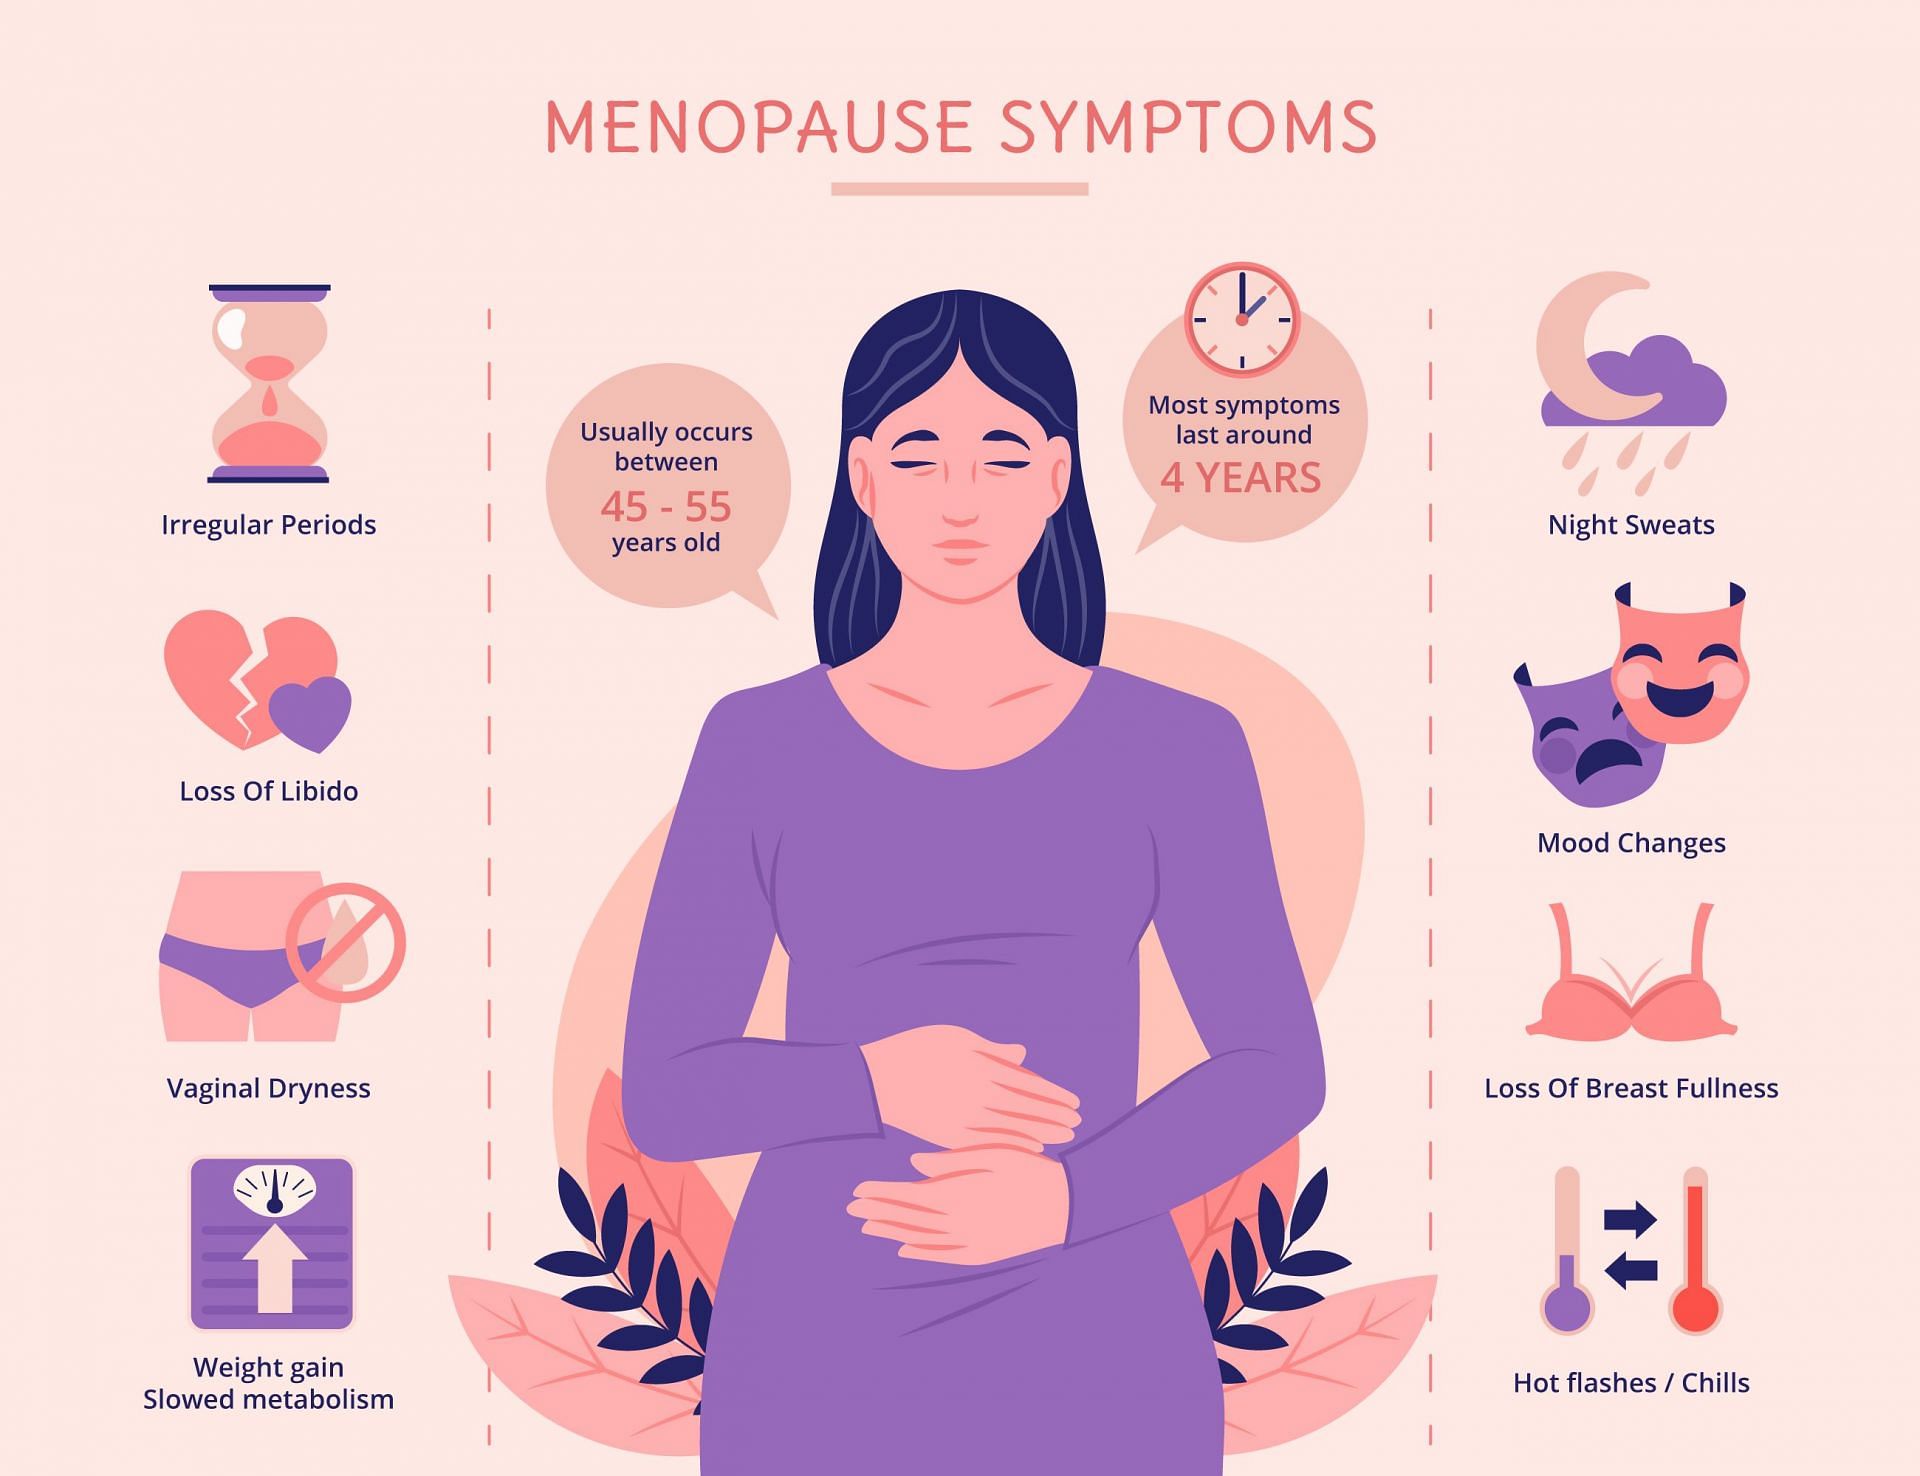 Not all women experience depression in menopause, but they likely to experience all of these. (Image via Freepik/ Freepik)